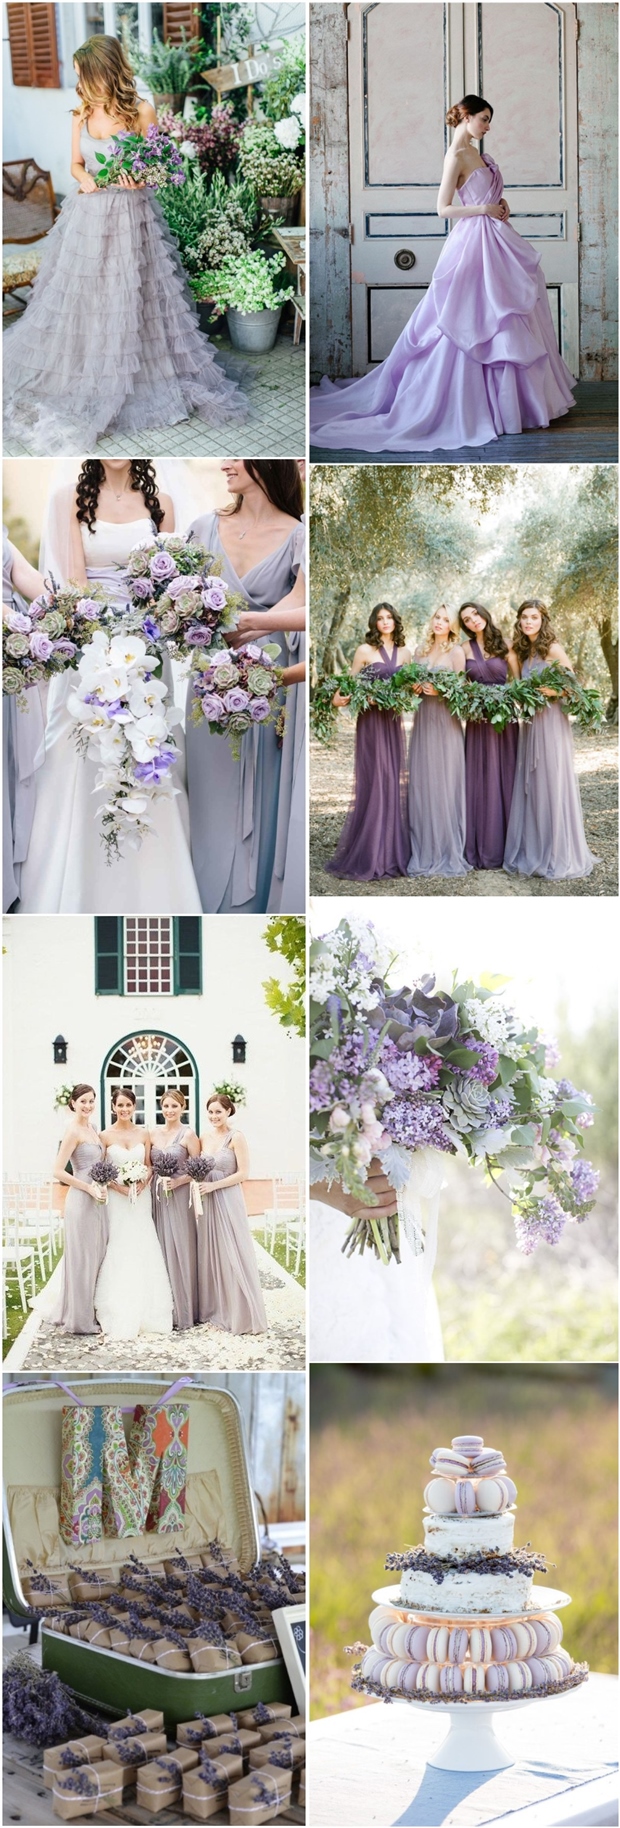 13 Purple Wedding Ideas That Add Color to Your Big Day